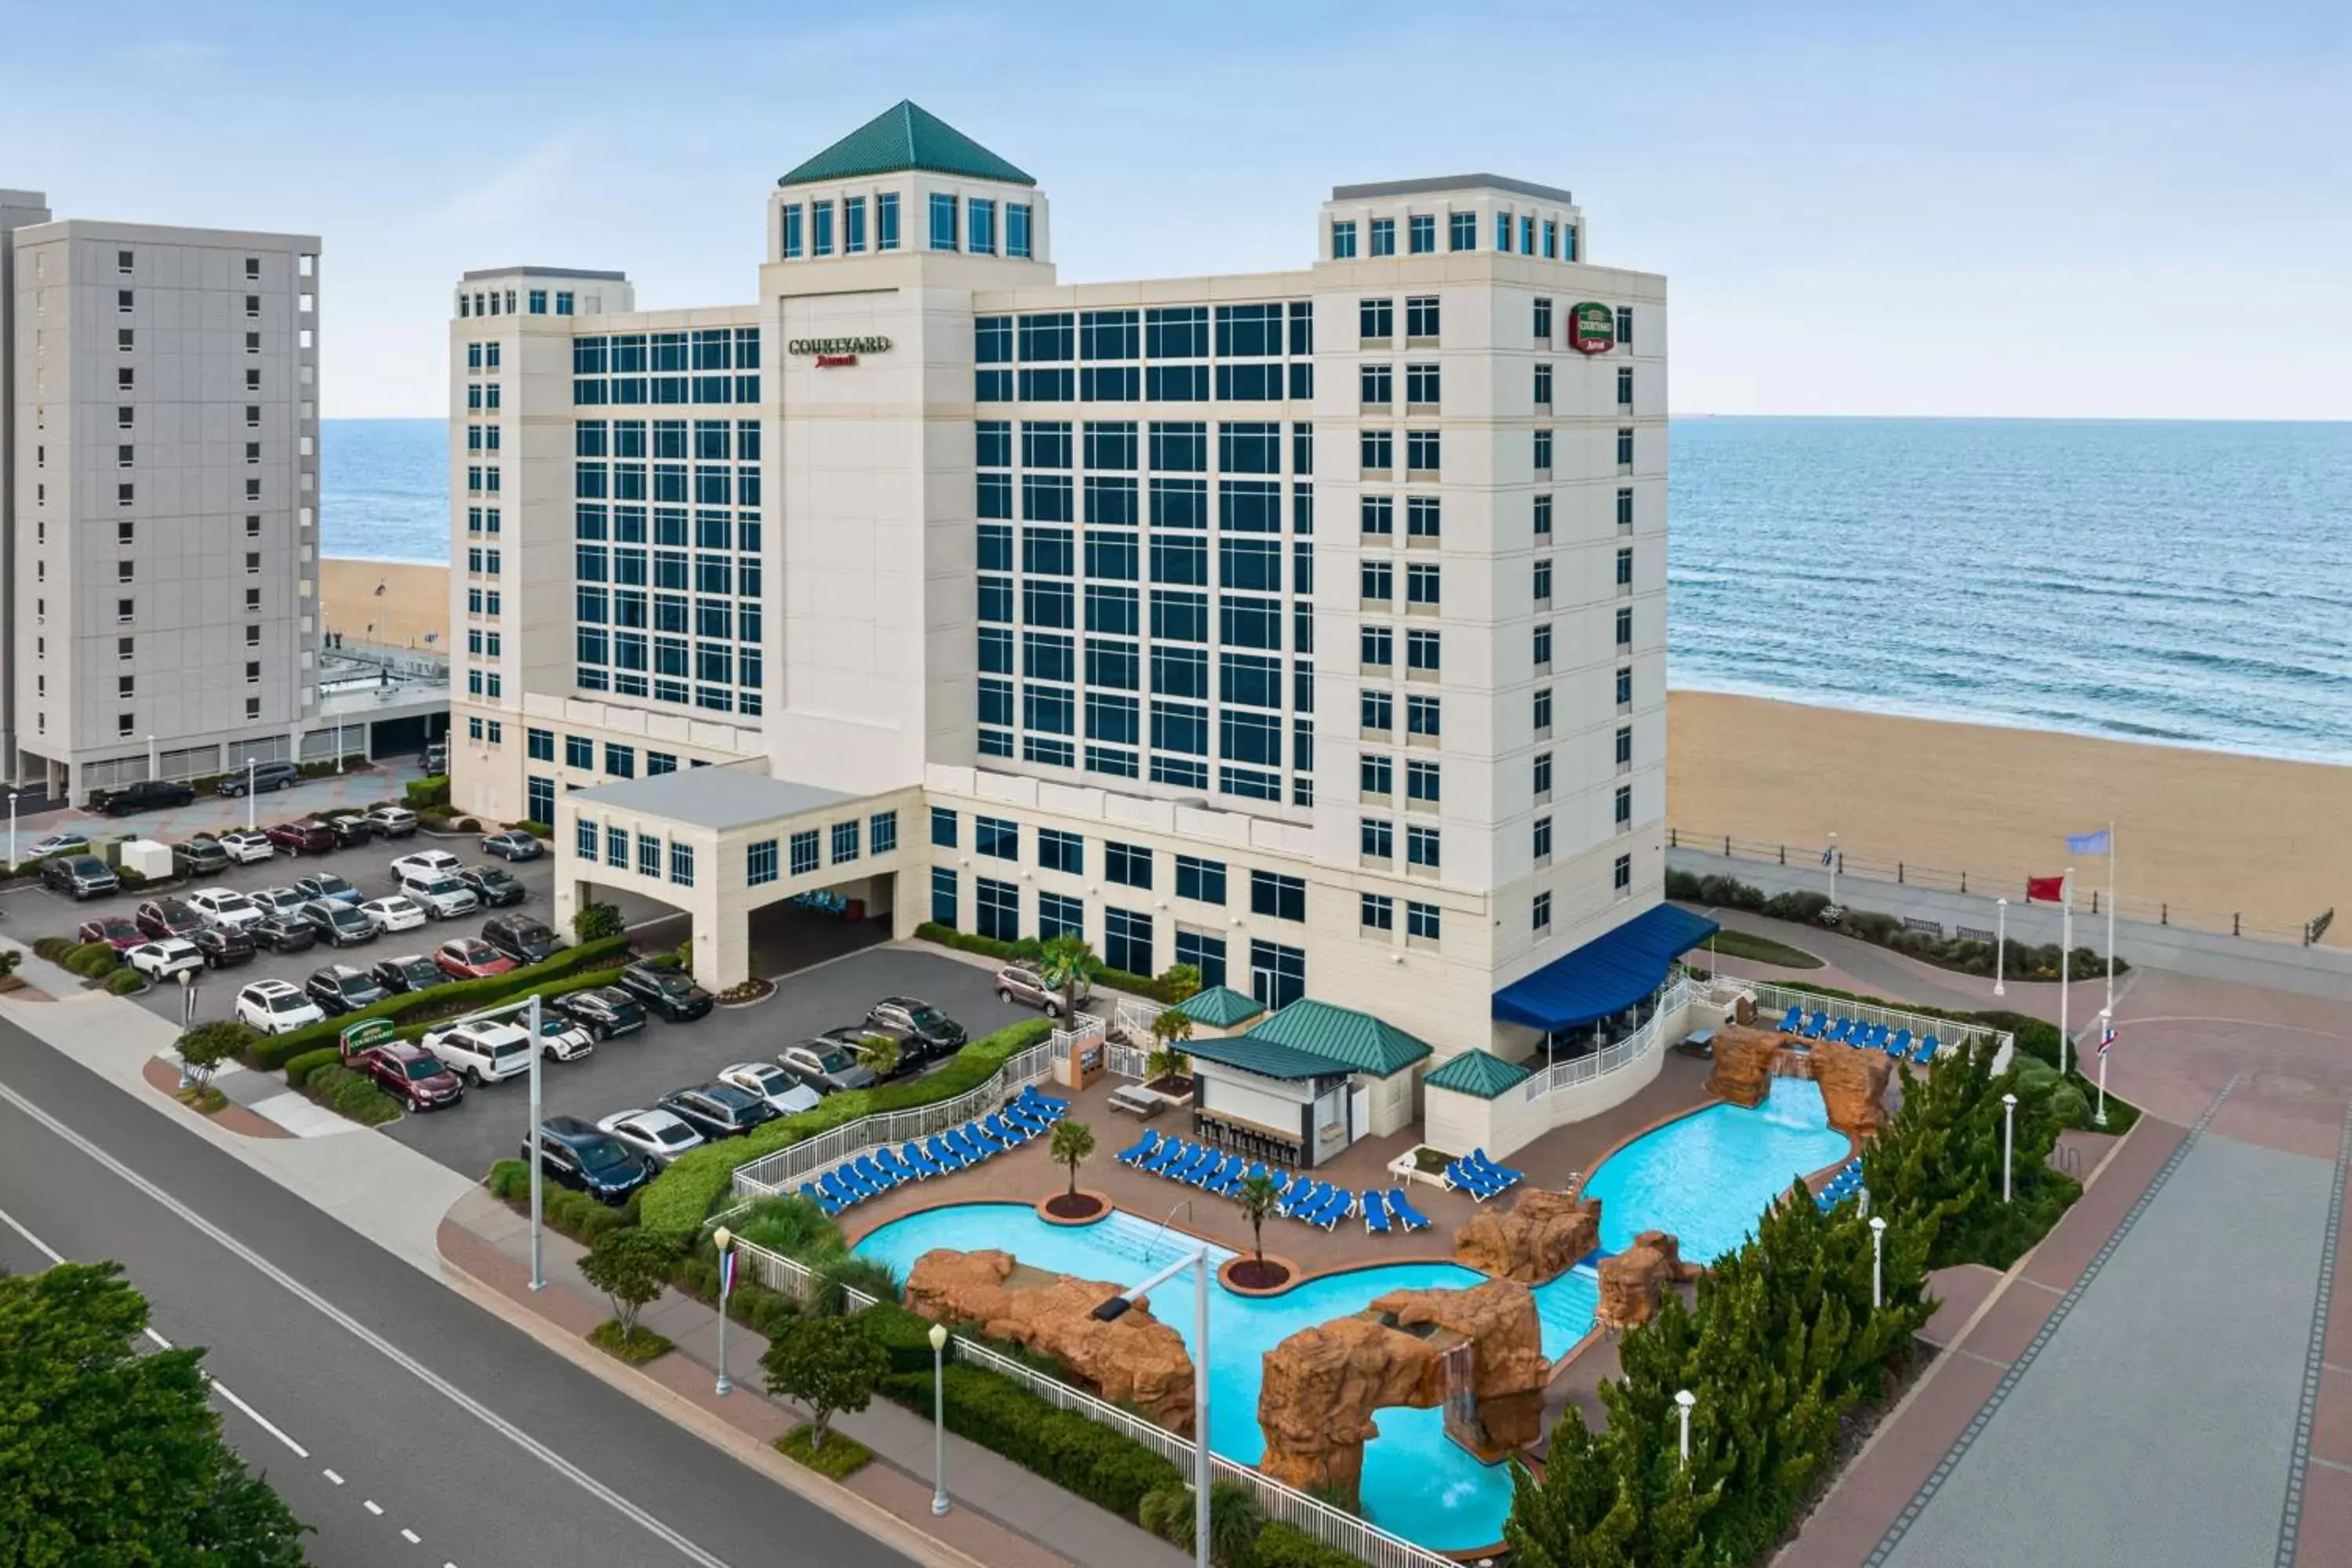 Property building in Courtyard Virginia Beach Oceanfront / North 37th Street